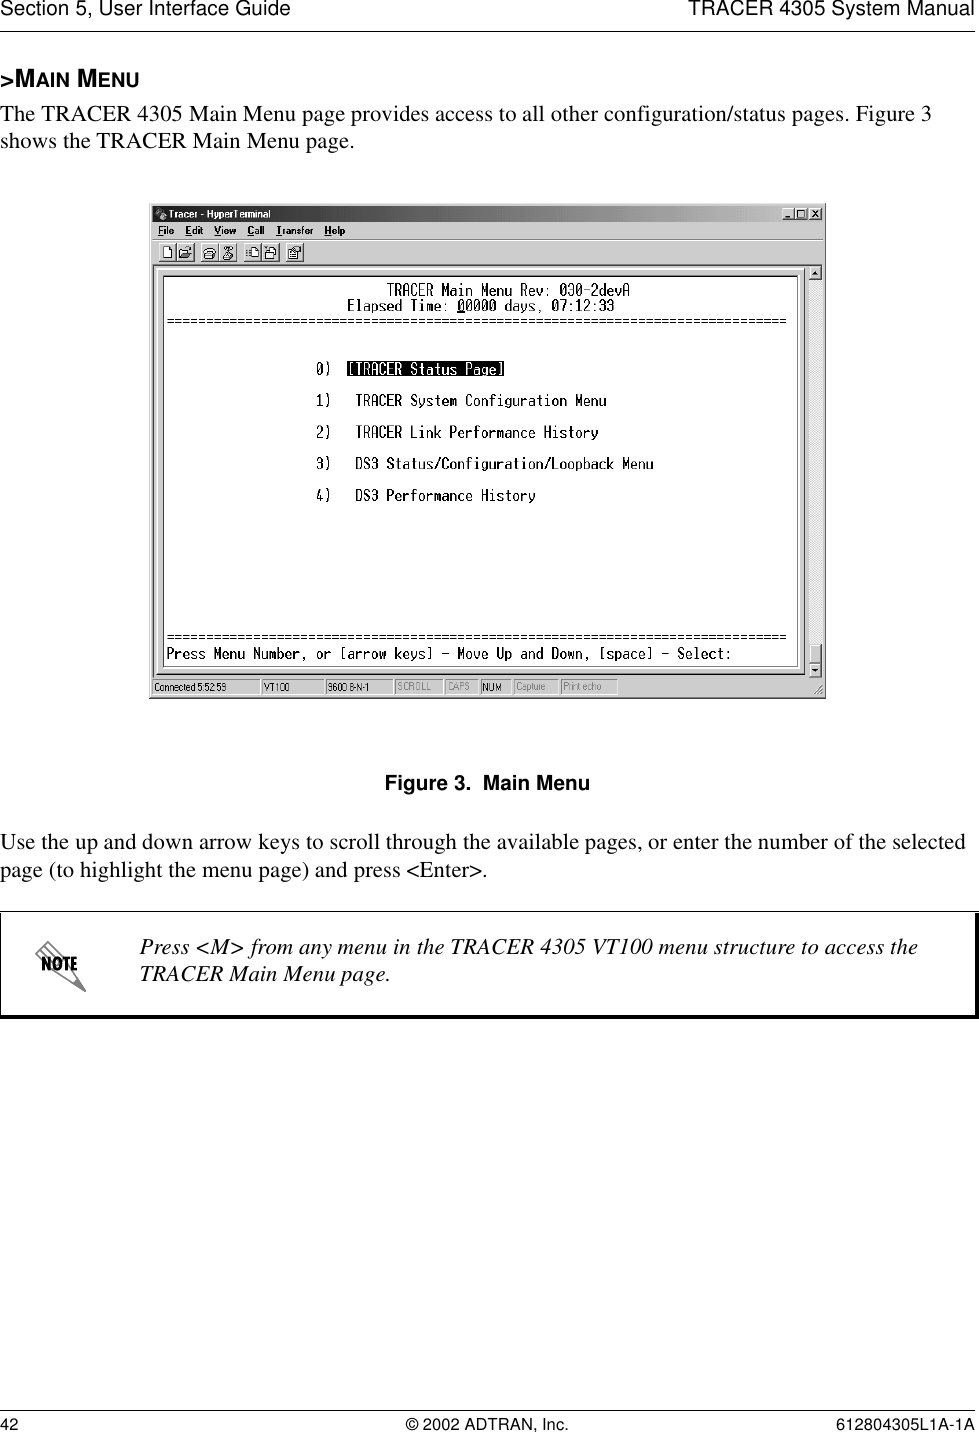 Section 5, User Interface Guide TRACER 4305 System Manual42 © 2002 ADTRAN, Inc. 612804305L1A-1A&gt;MAIN MENUThe TRACER 4305 Main Menu page provides access to all other configuration/status pages. Figure 3 shows the TRACER Main Menu page.Figure 3.  Main MenuUse the up and down arrow keys to scroll through the available pages, or enter the number of the selected page (to highlight the menu page) and press &lt;Enter&gt;.Press &lt;M&gt; from any menu in the TRACER 4305 VT100 menu structure to access the TRACER Main Menu page.